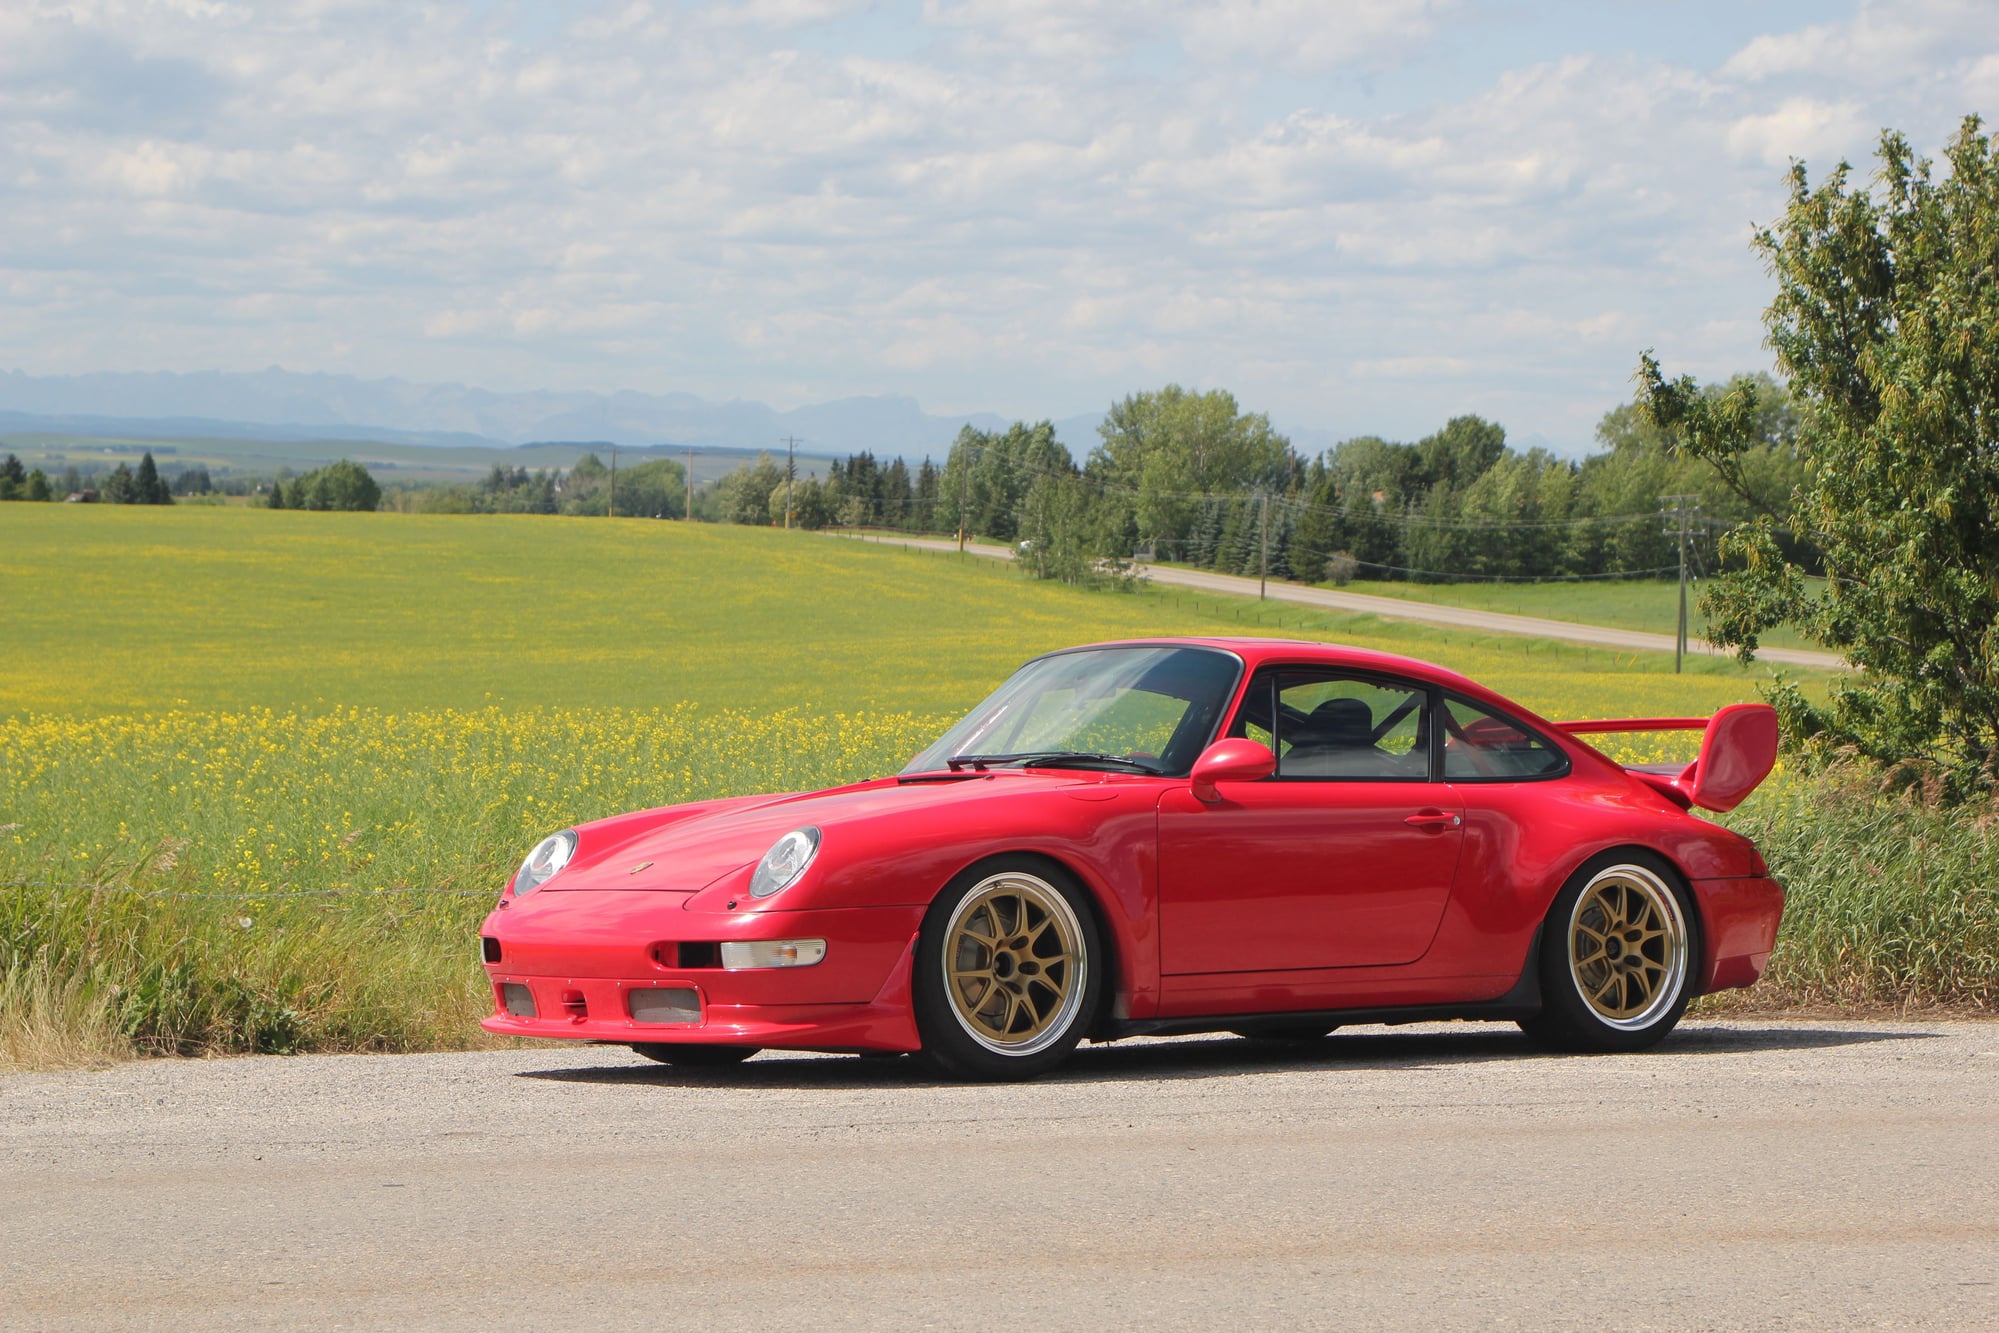 1995 Porsche 911 - 1995 993 RS 4.0 For Sale - Used - VIN WPOAA2998SS322097 - 77,100 Miles - 6 cyl - 2WD - Manual - Coupe - Red - Calgary, AB T3Z3T9, Canada